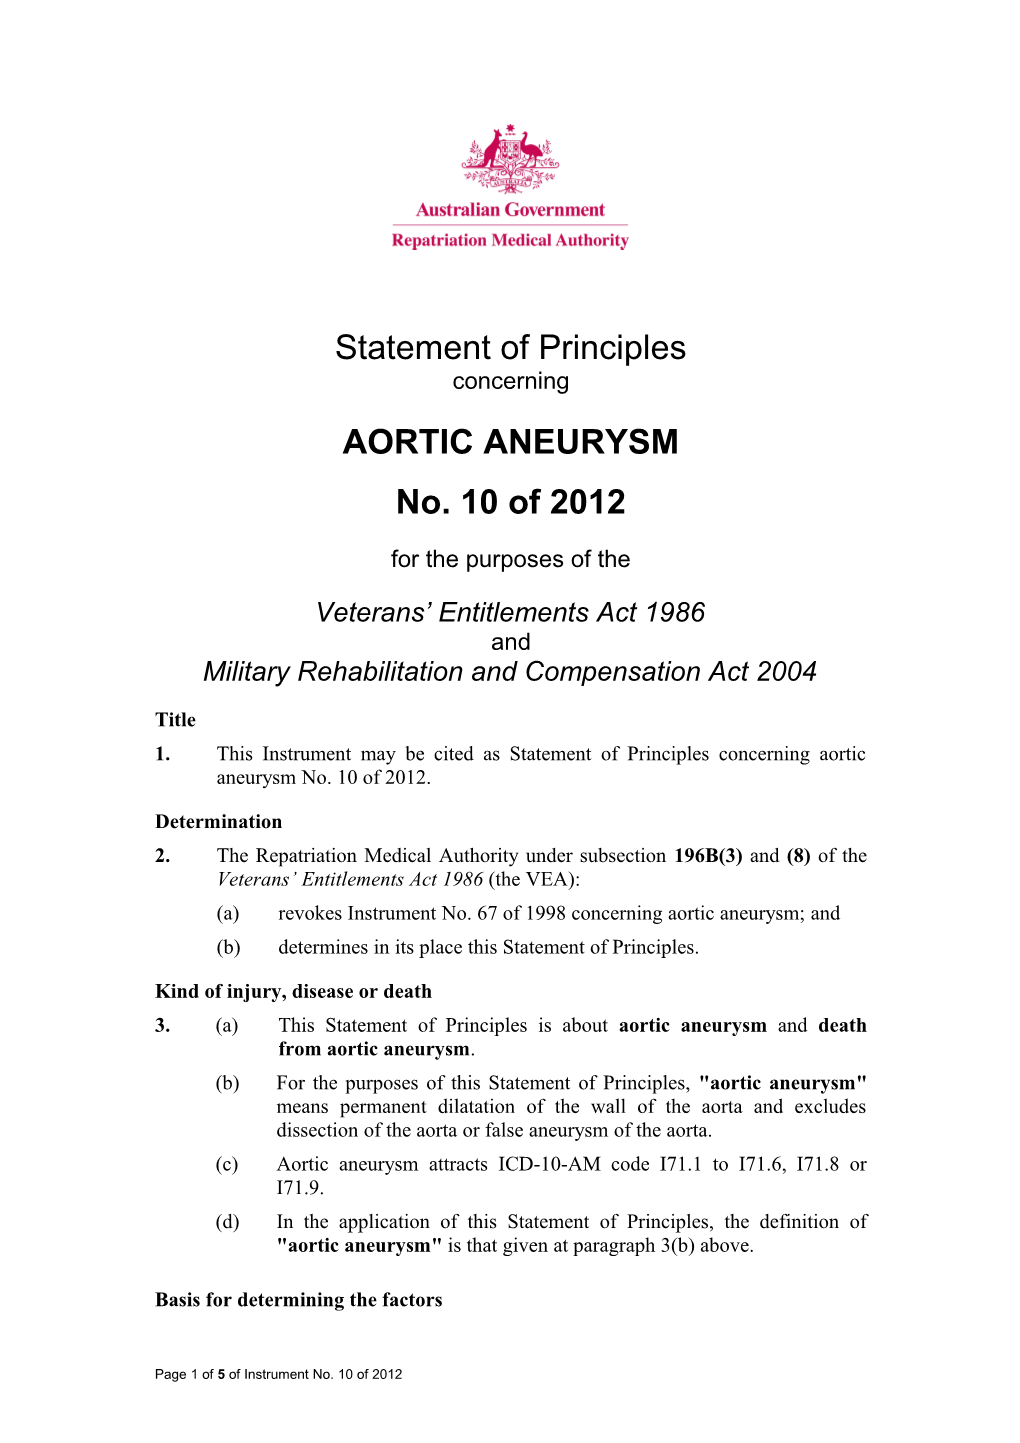 Statement of Principles 10 of 2012 Aortic Aneurysm Balance of Probabilities